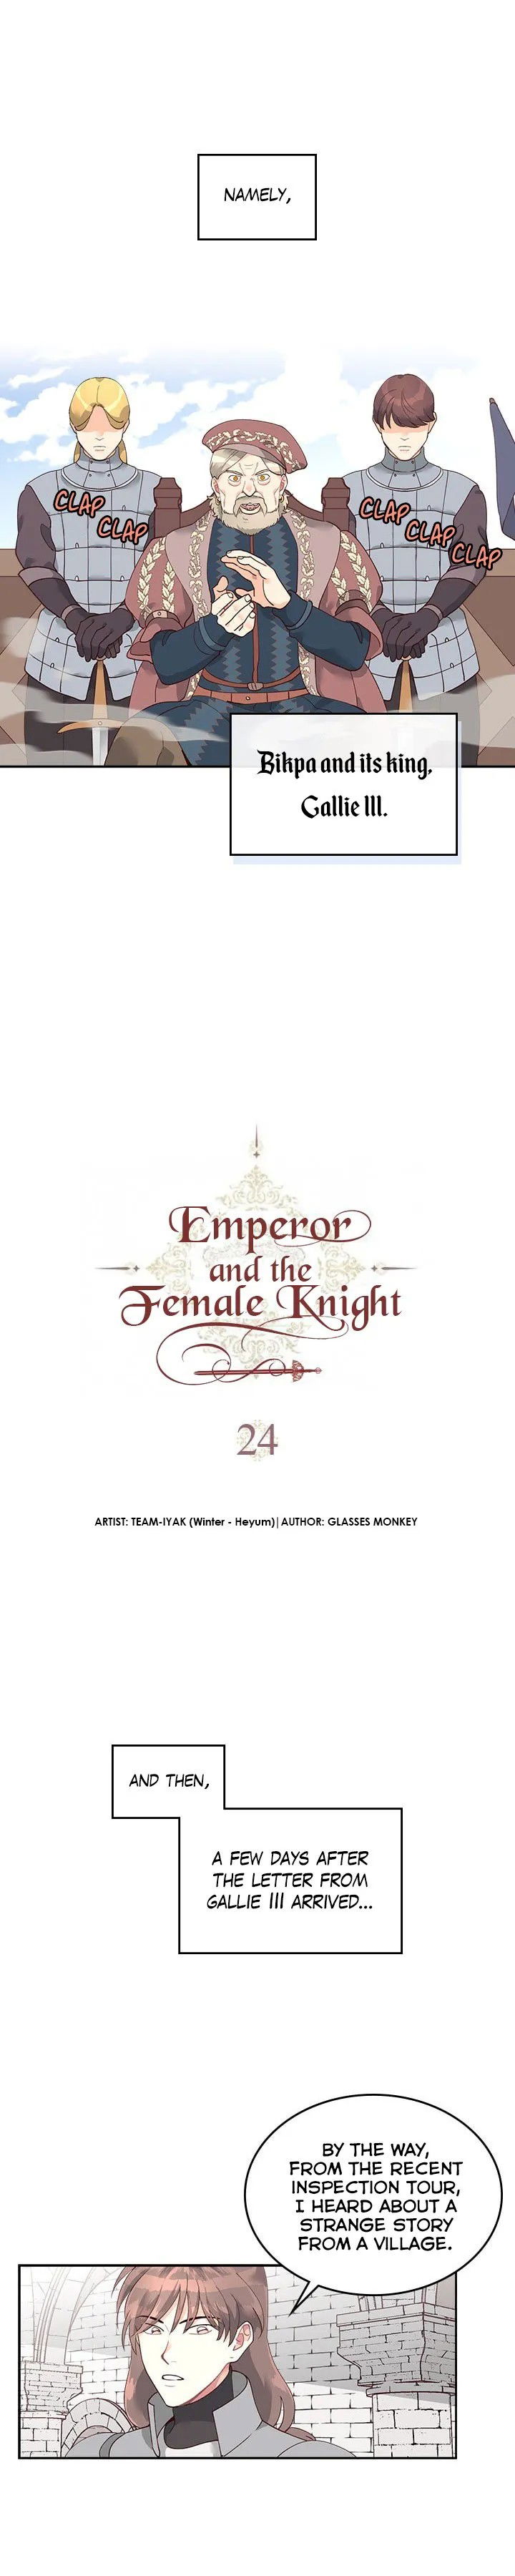 emperor-and-the-female-knight-chap-24-2